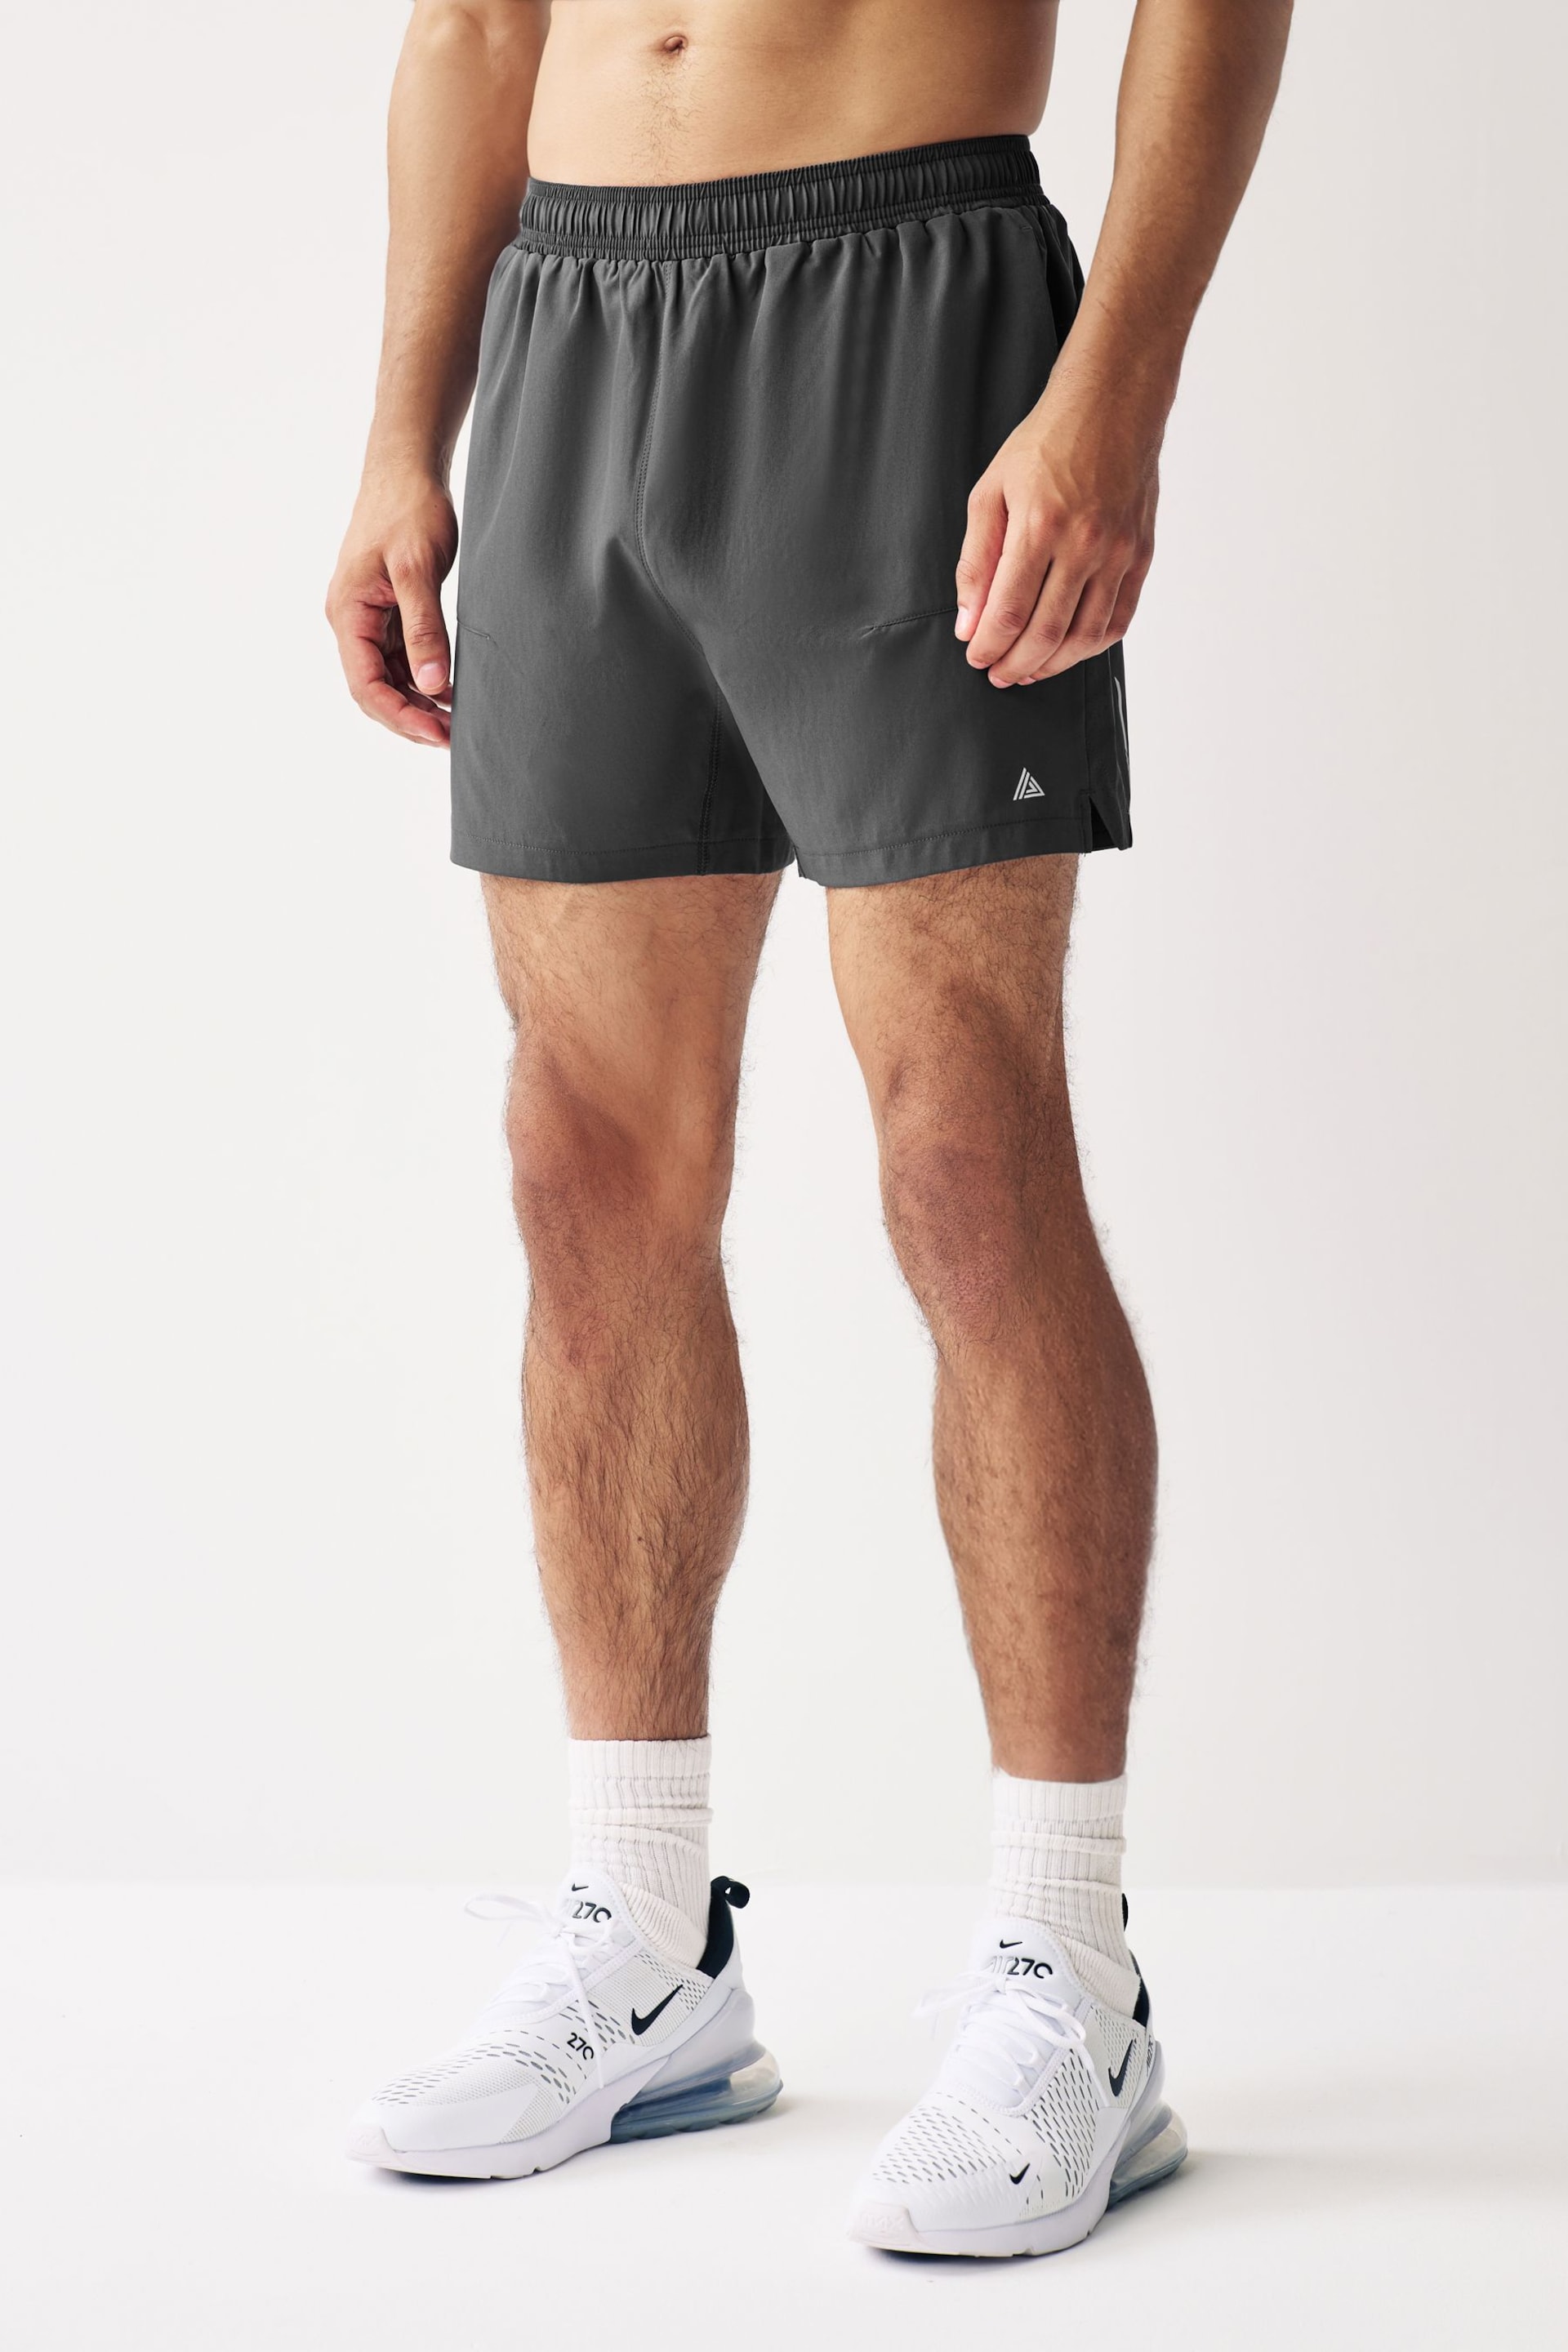 Slate Grey 5 Inch Active Gym Sports Shorts - Image 1 of 7